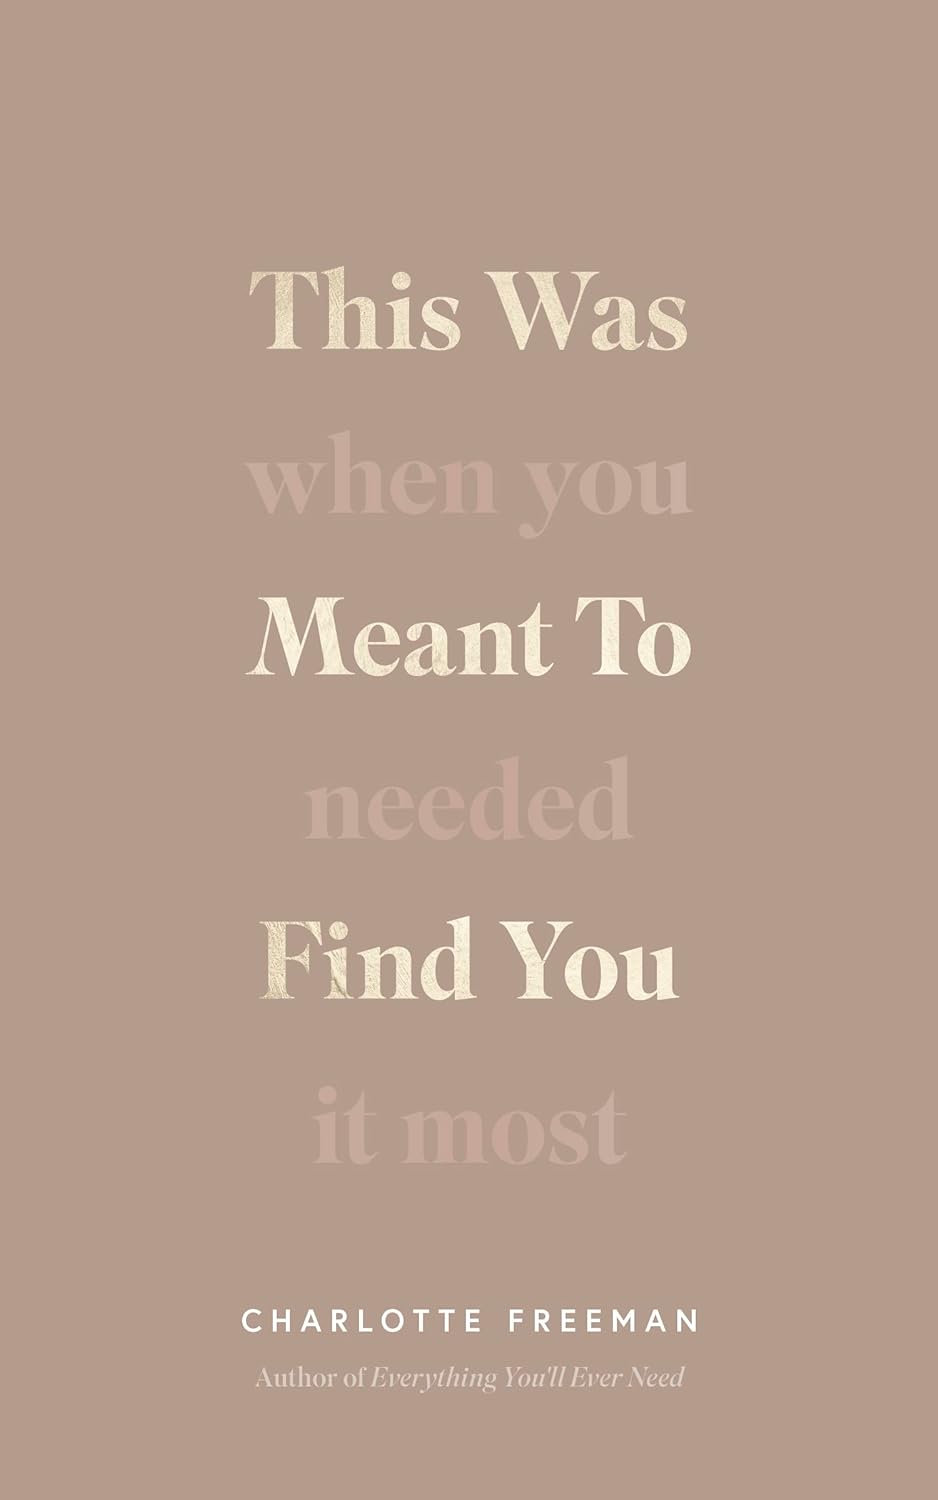 This Was Meant to Find You: When You Needed It Most by Charlotte Freeman